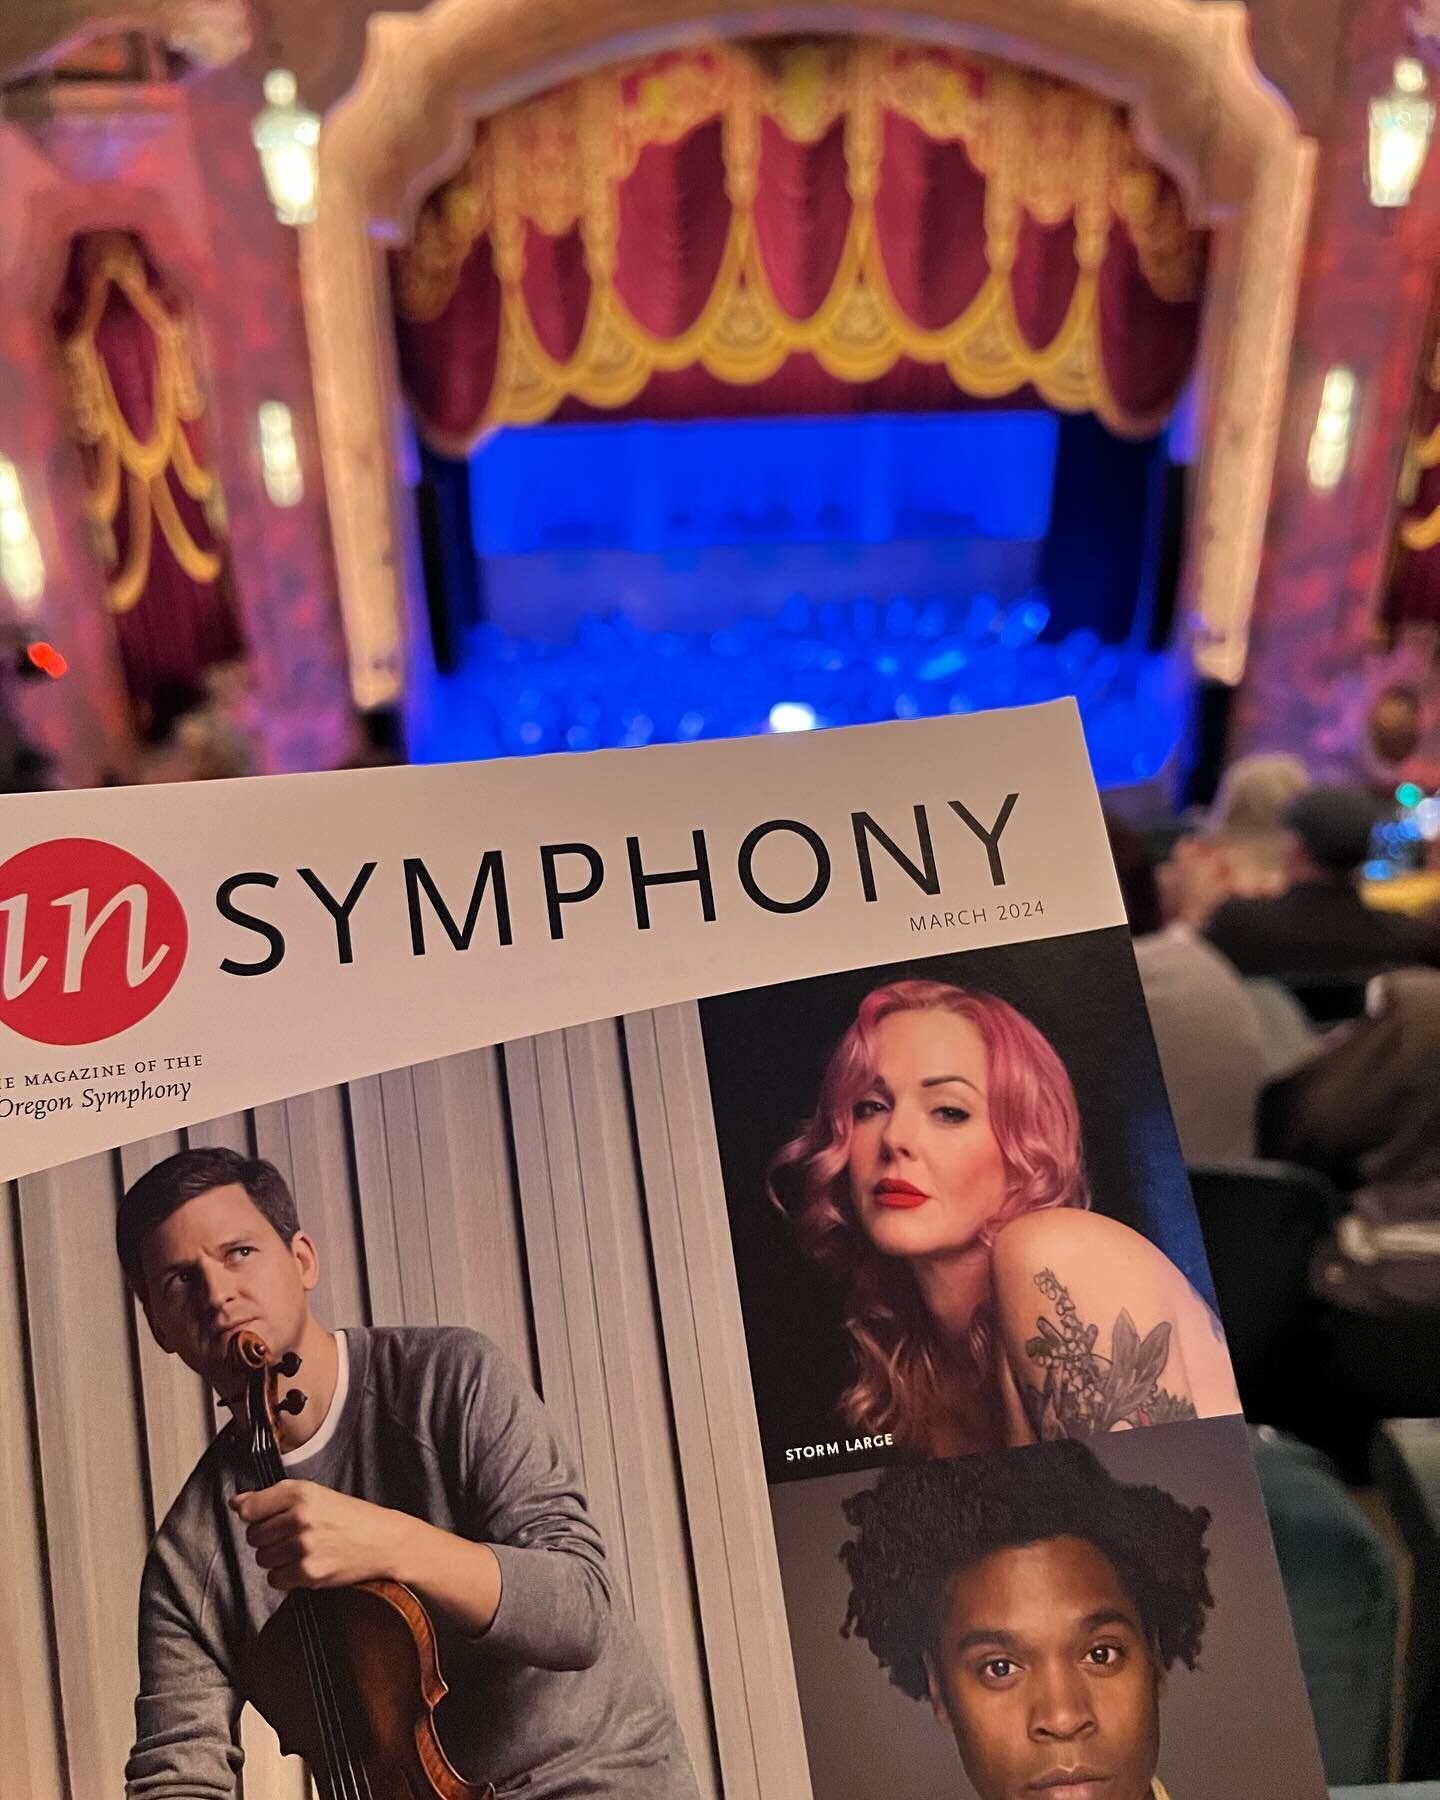 Wow! What a show! 
Somehow this is the first time I&rsquo;ve seen @mattimus_maximus perform with the symphony and he sounds amazing. @stormof69 can sing like no other, the @oregonsymphony is top notch and I&rsquo;m having a blast! What a great way to